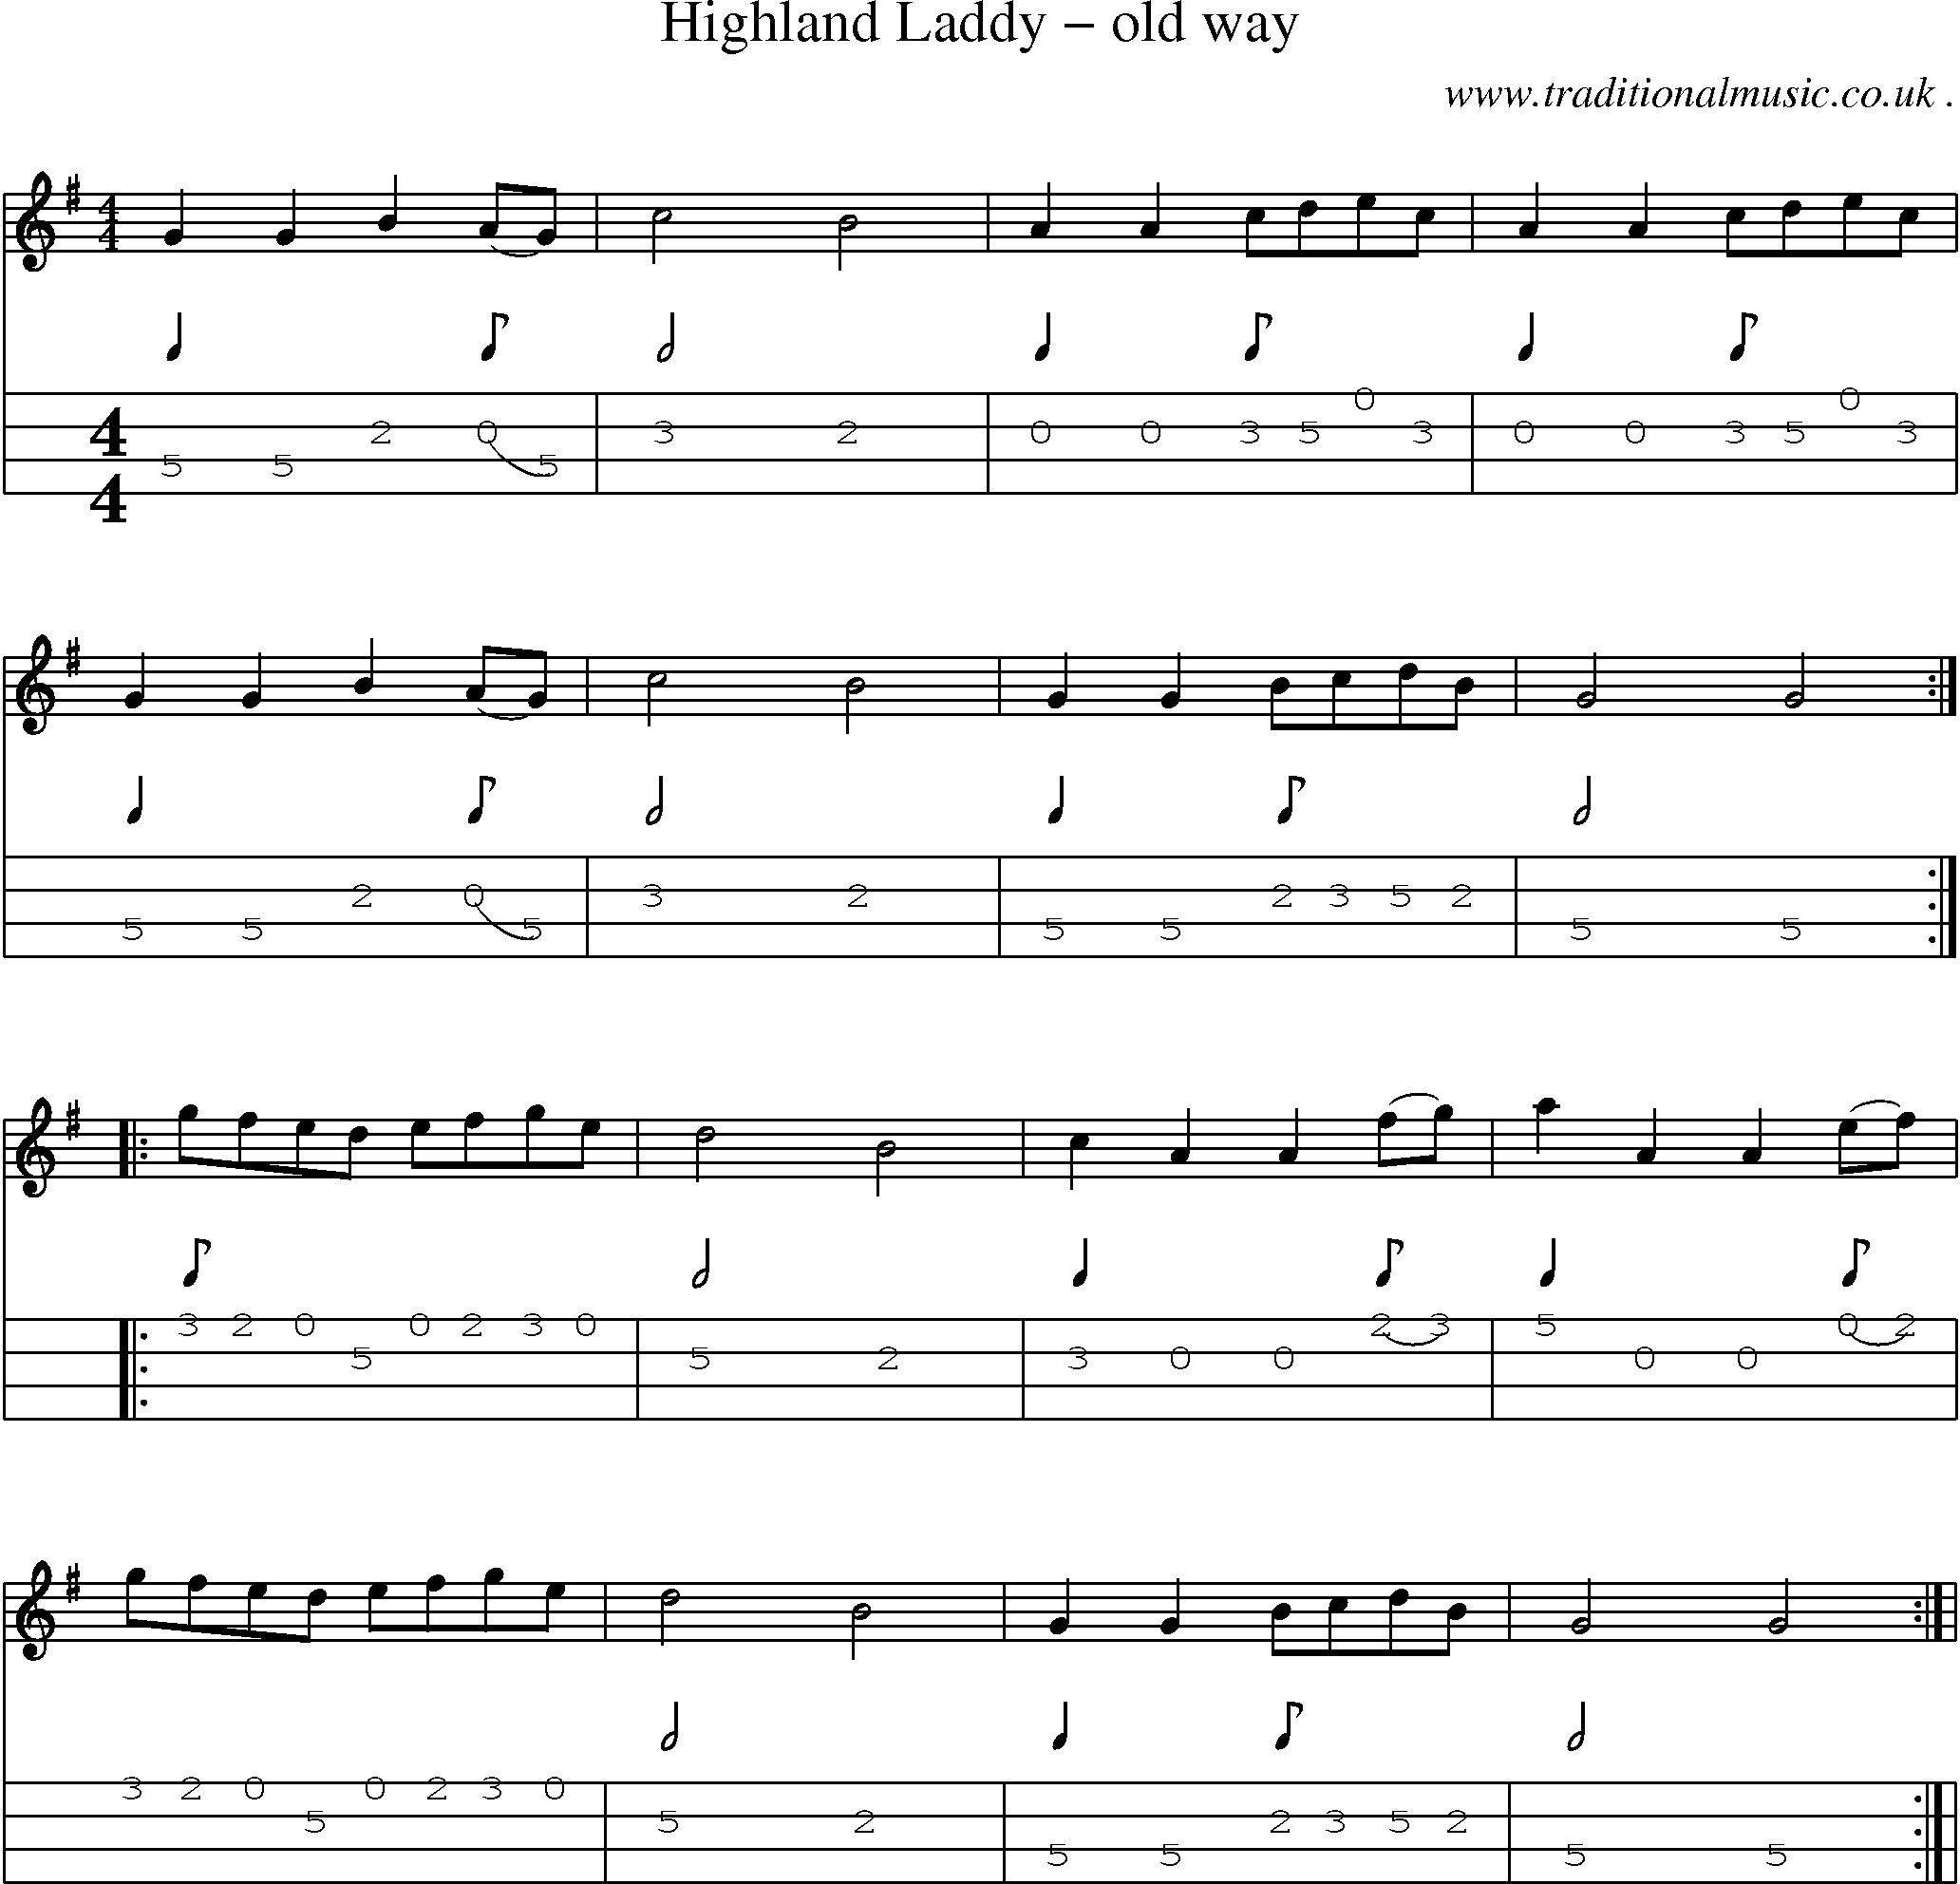 Sheet-Music and Mandolin Tabs for Highland Laddy Old Way